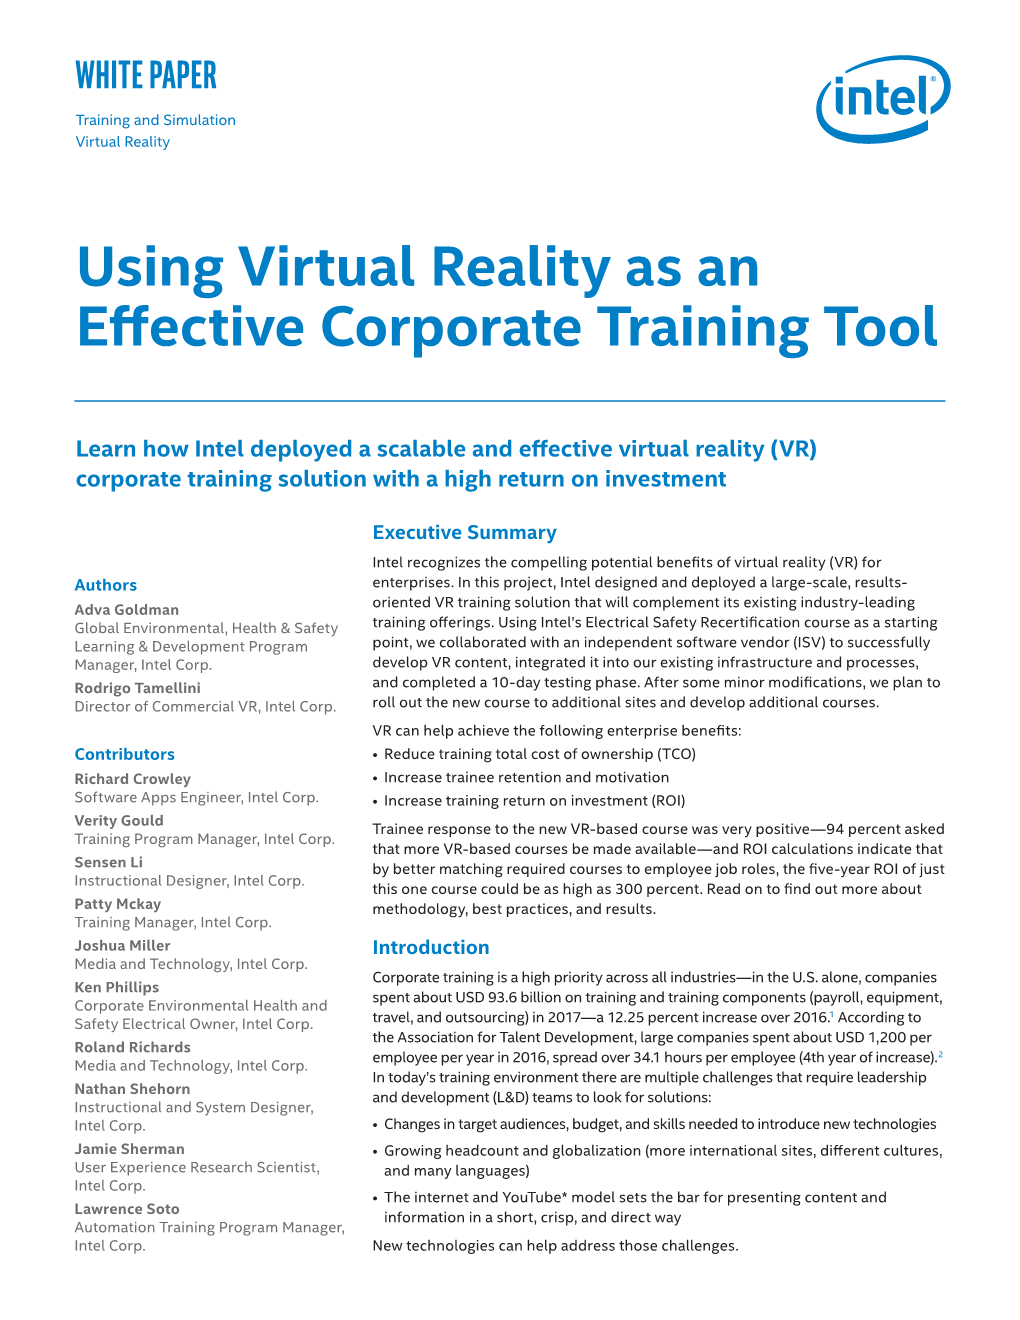 Corporate Training with Virtual Reality